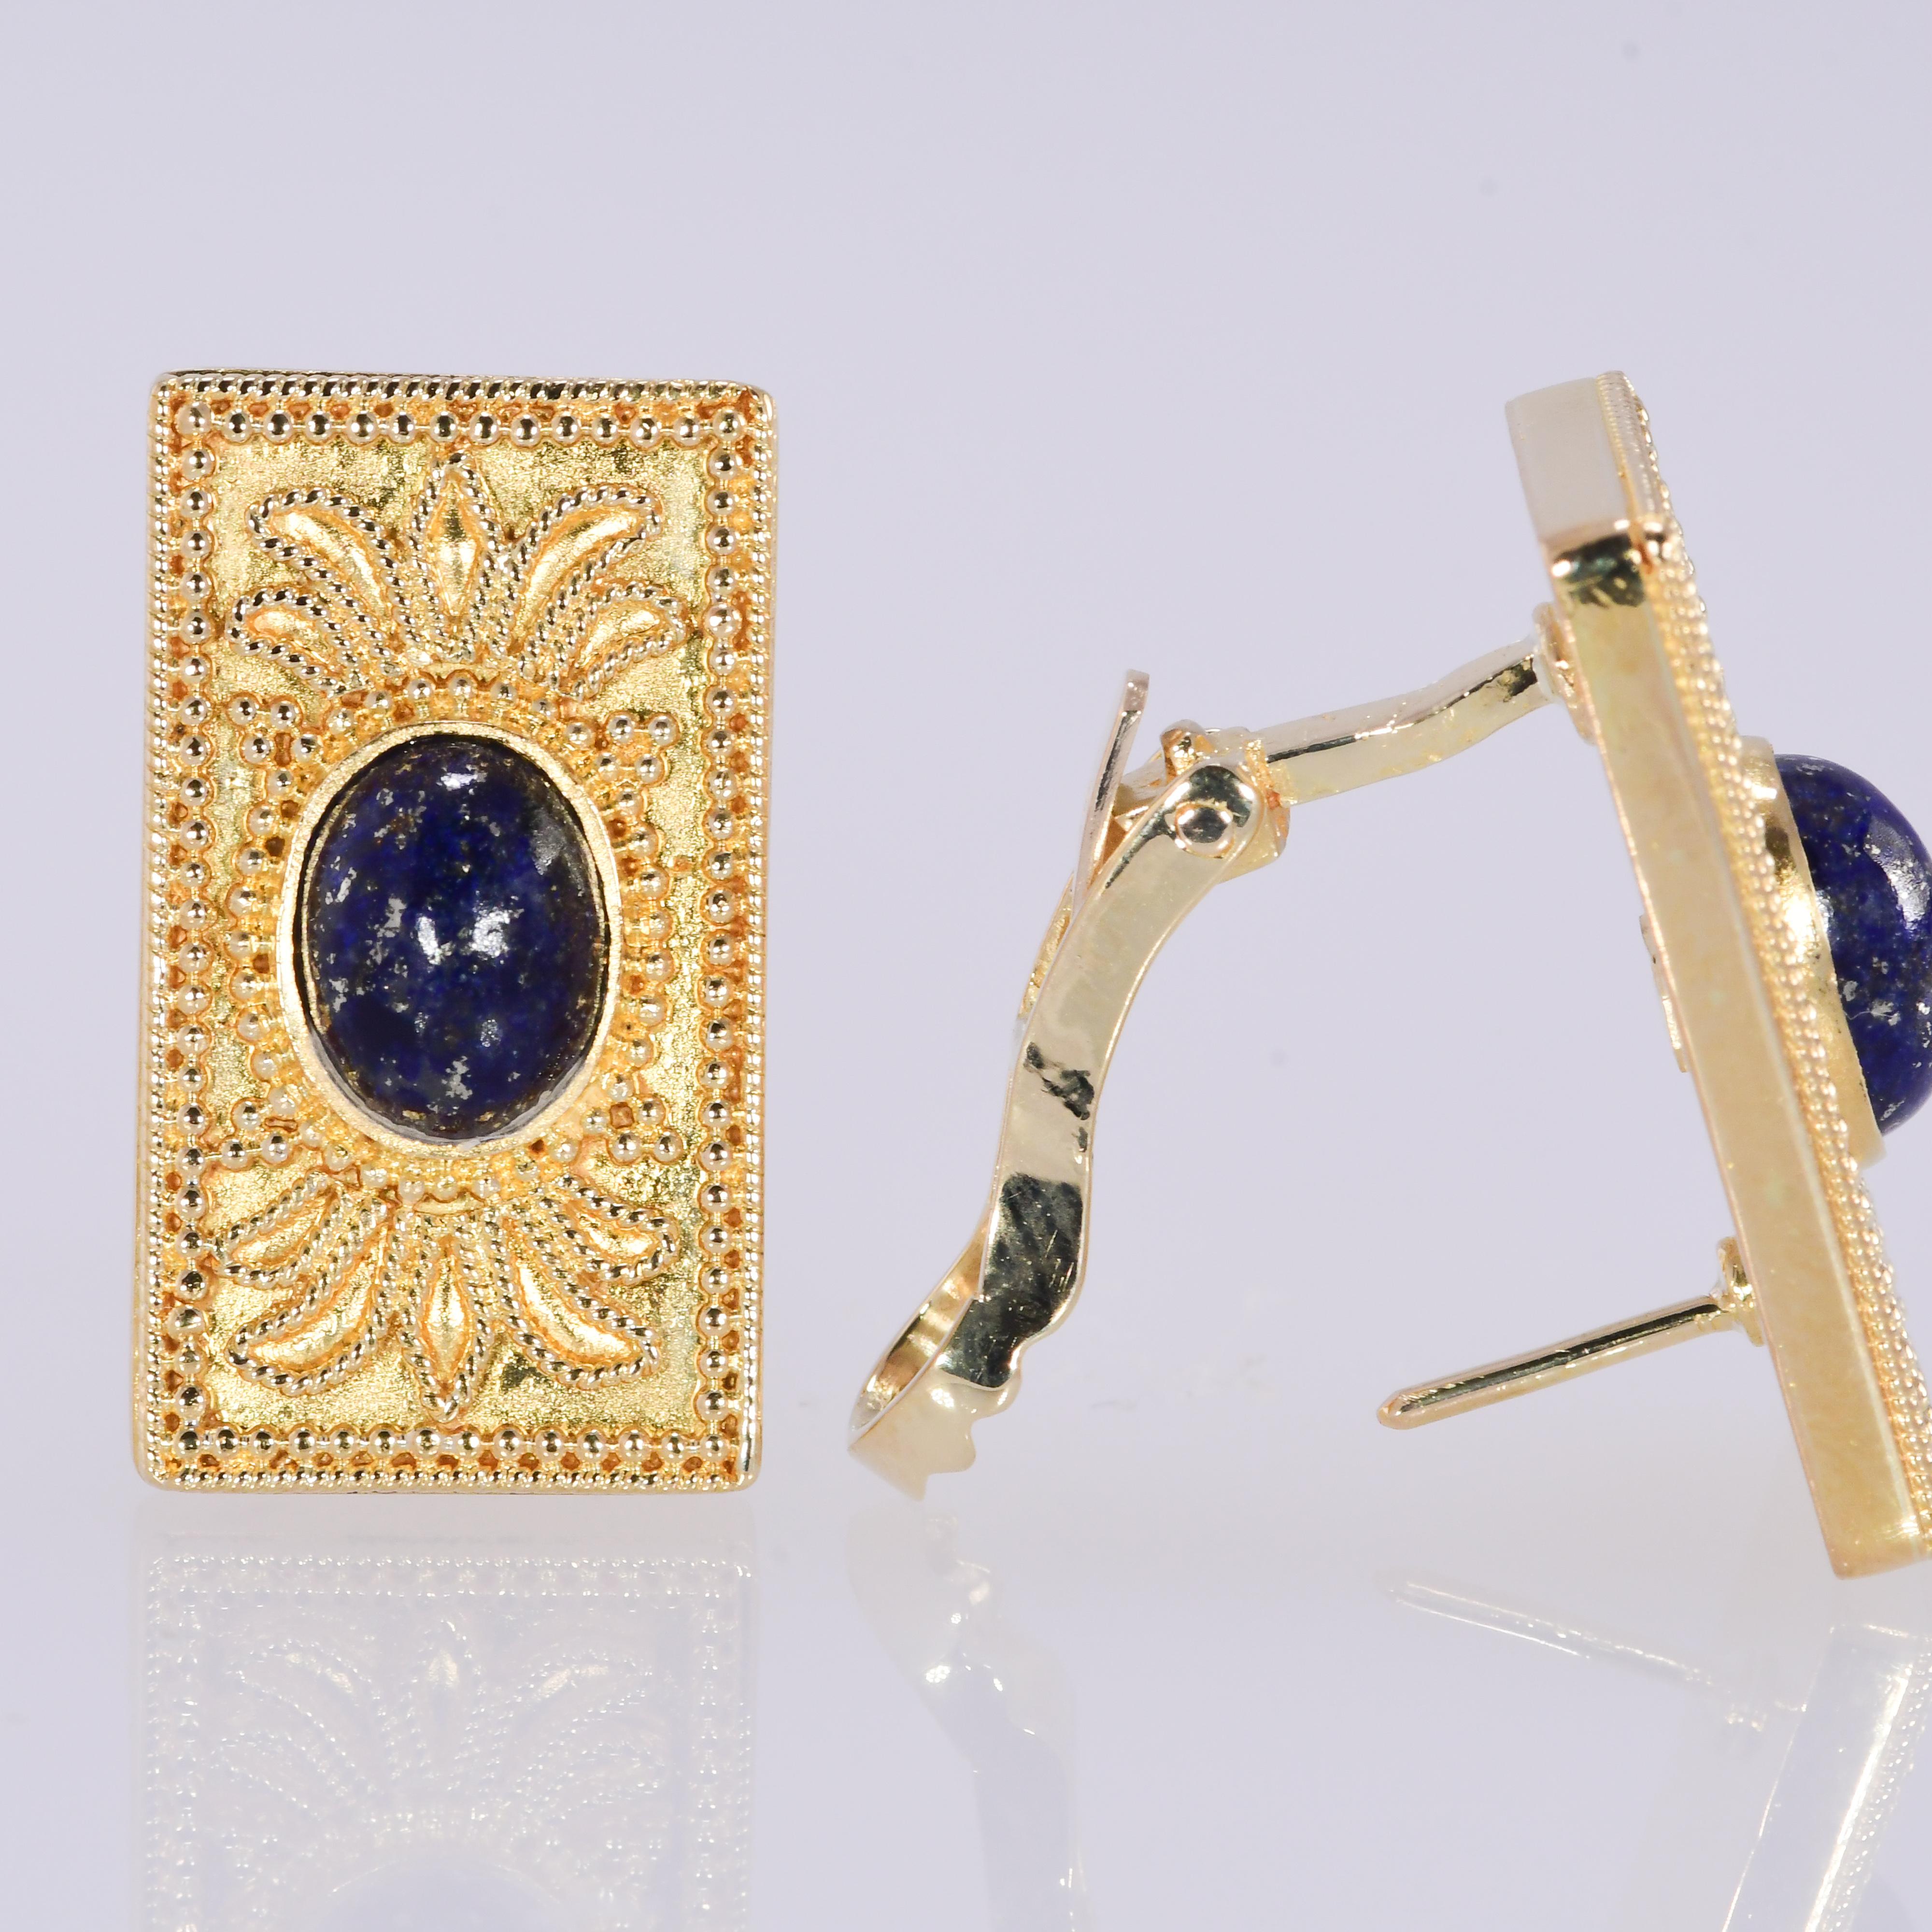 Etruscan revival oval cabochon lapis lazuli earrings. 22 karat yellow gold with 18 karat yellow gold omega backs. A beautiful rectangular shape with intricate design. The length is 11/16 inch. The width is 1/2 inch. The height is 1/8 inch. The